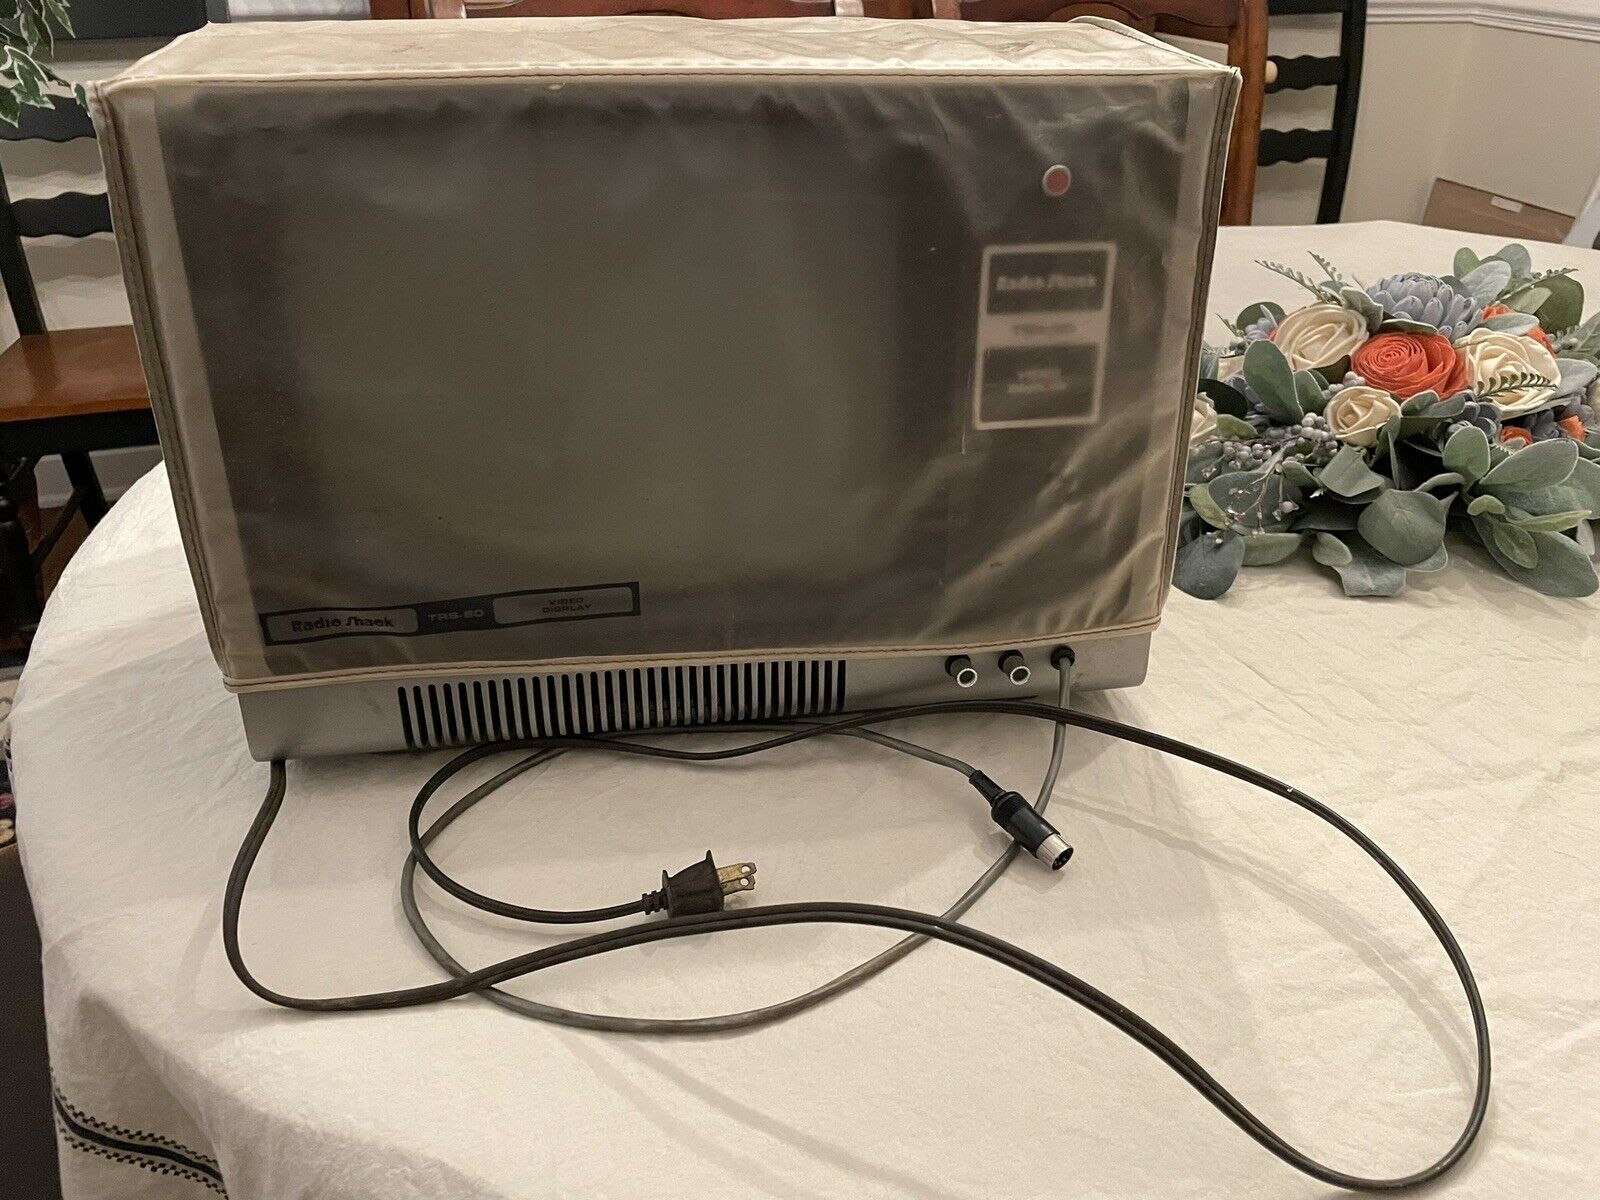 Vintage Radio Shack TRS-80 Video Display 26-1201 working with dust cover